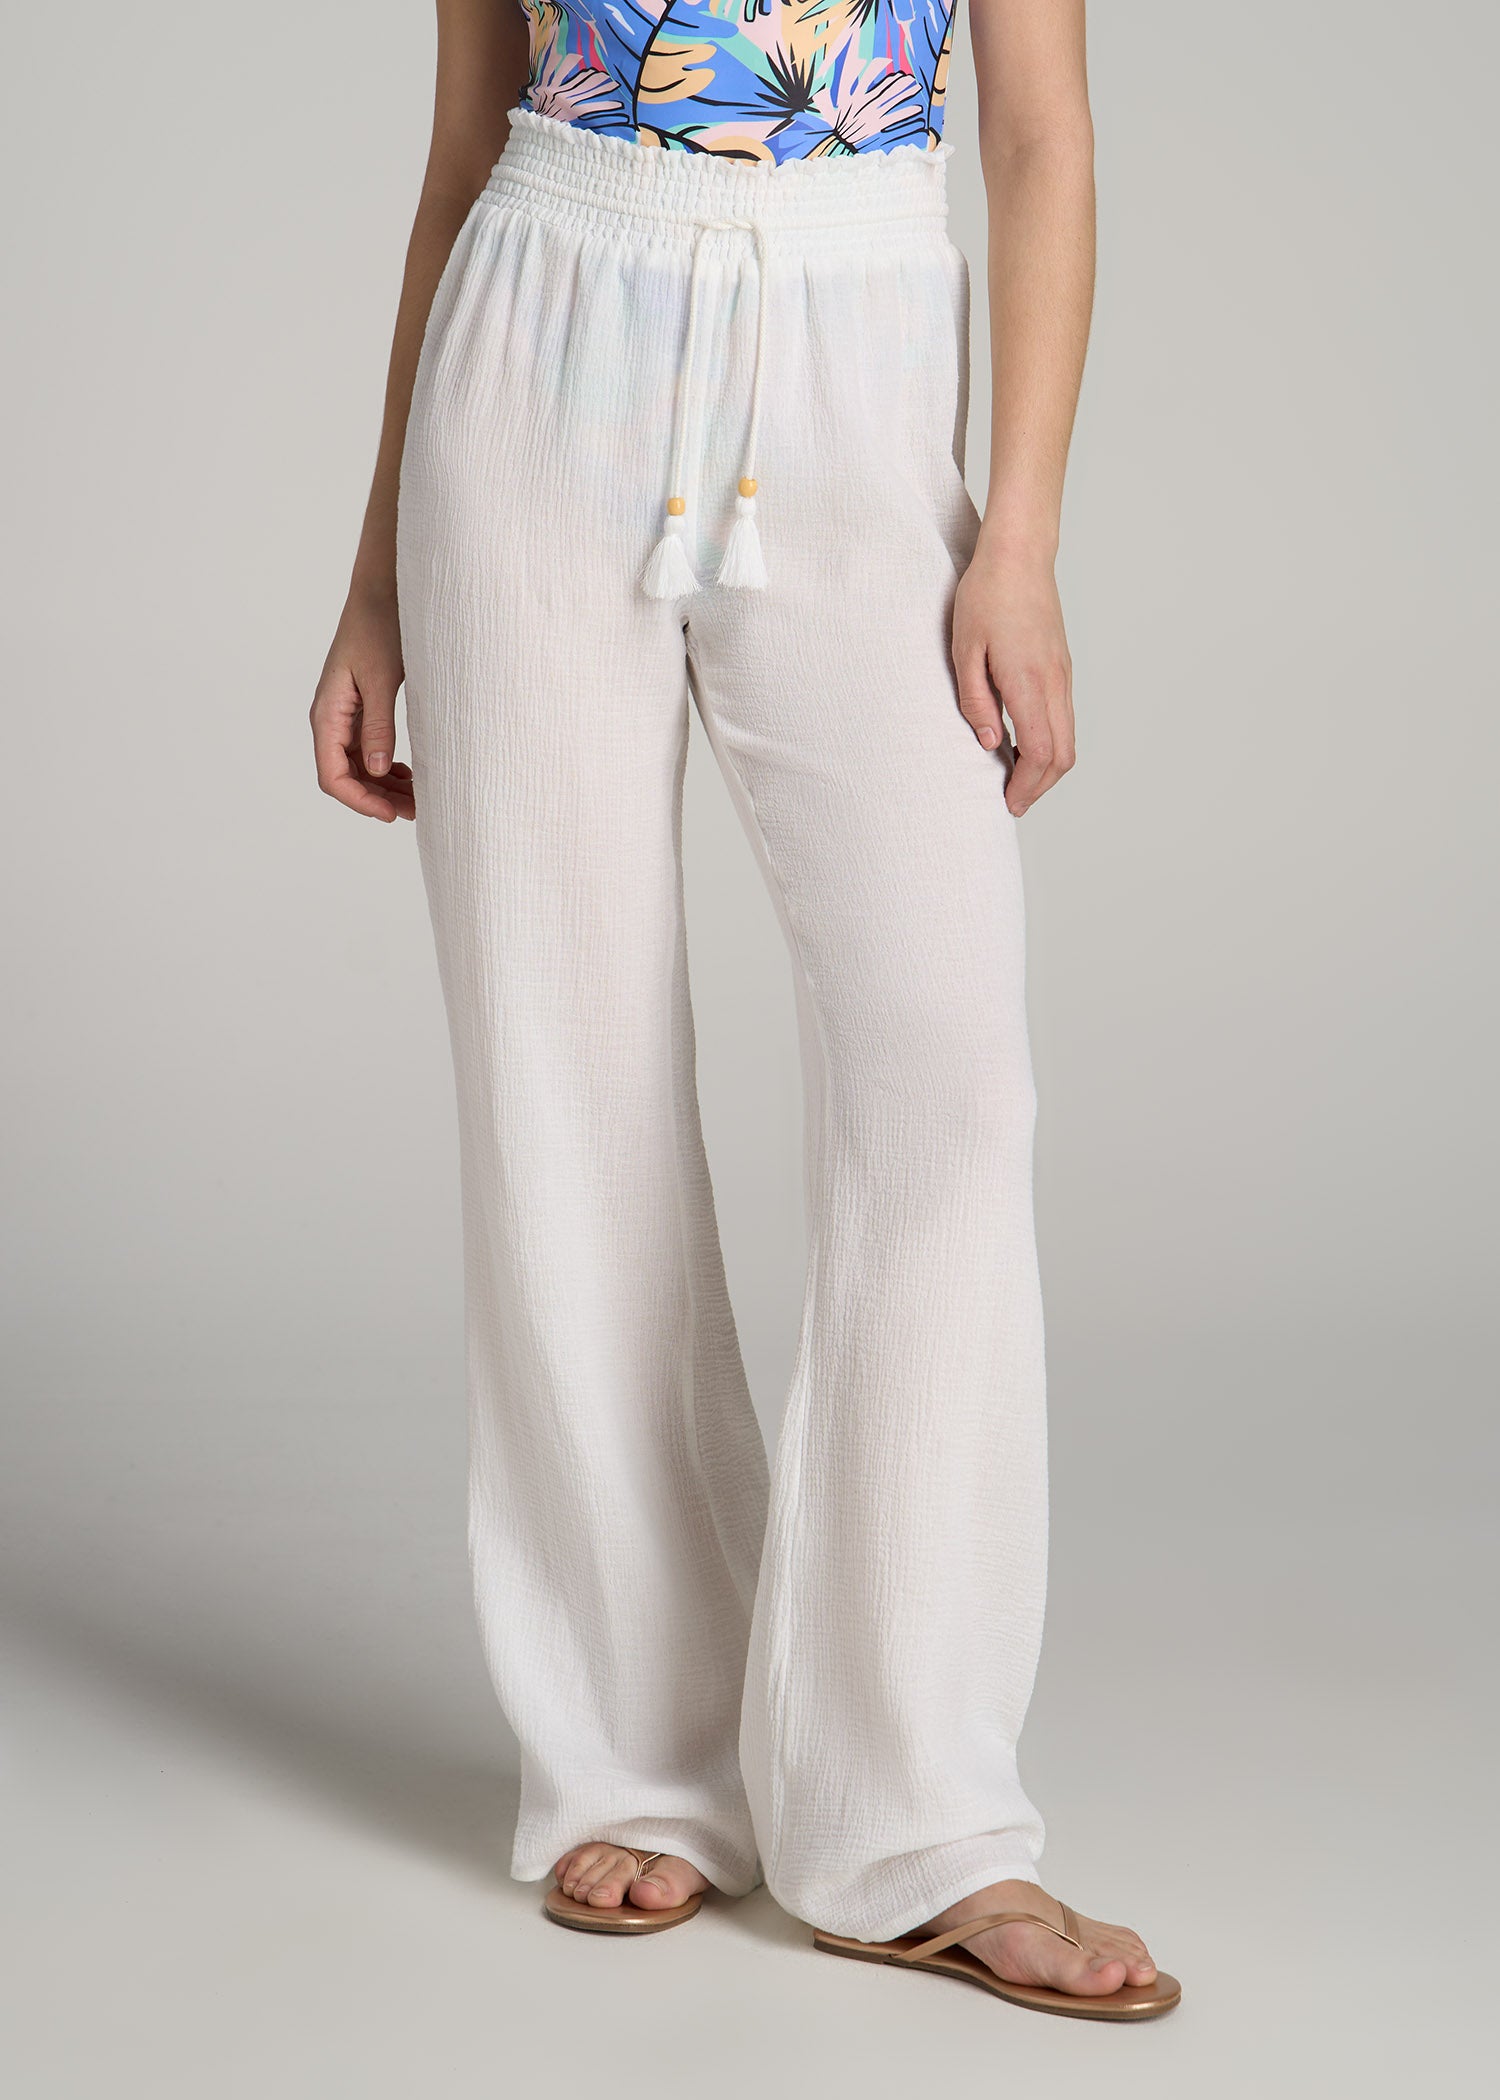 Gauze Cover Up Pants for Tall Women